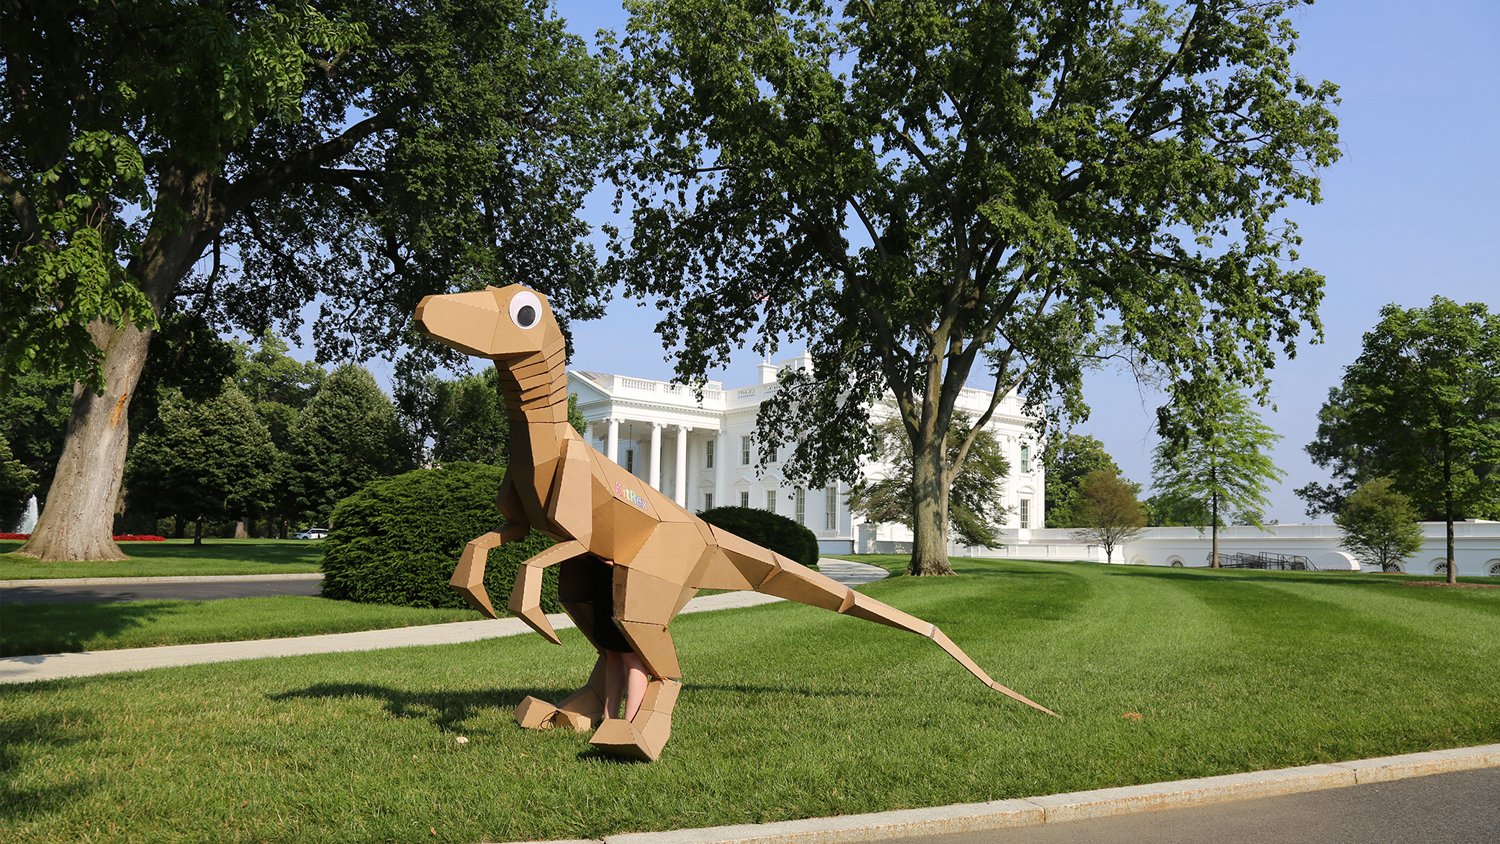 White House Dinosaur - Maker project of a cardboard dinosaur on the White House lawn to kick off the 2015 National Week of Making. (Photo by Ashleigh Axios)